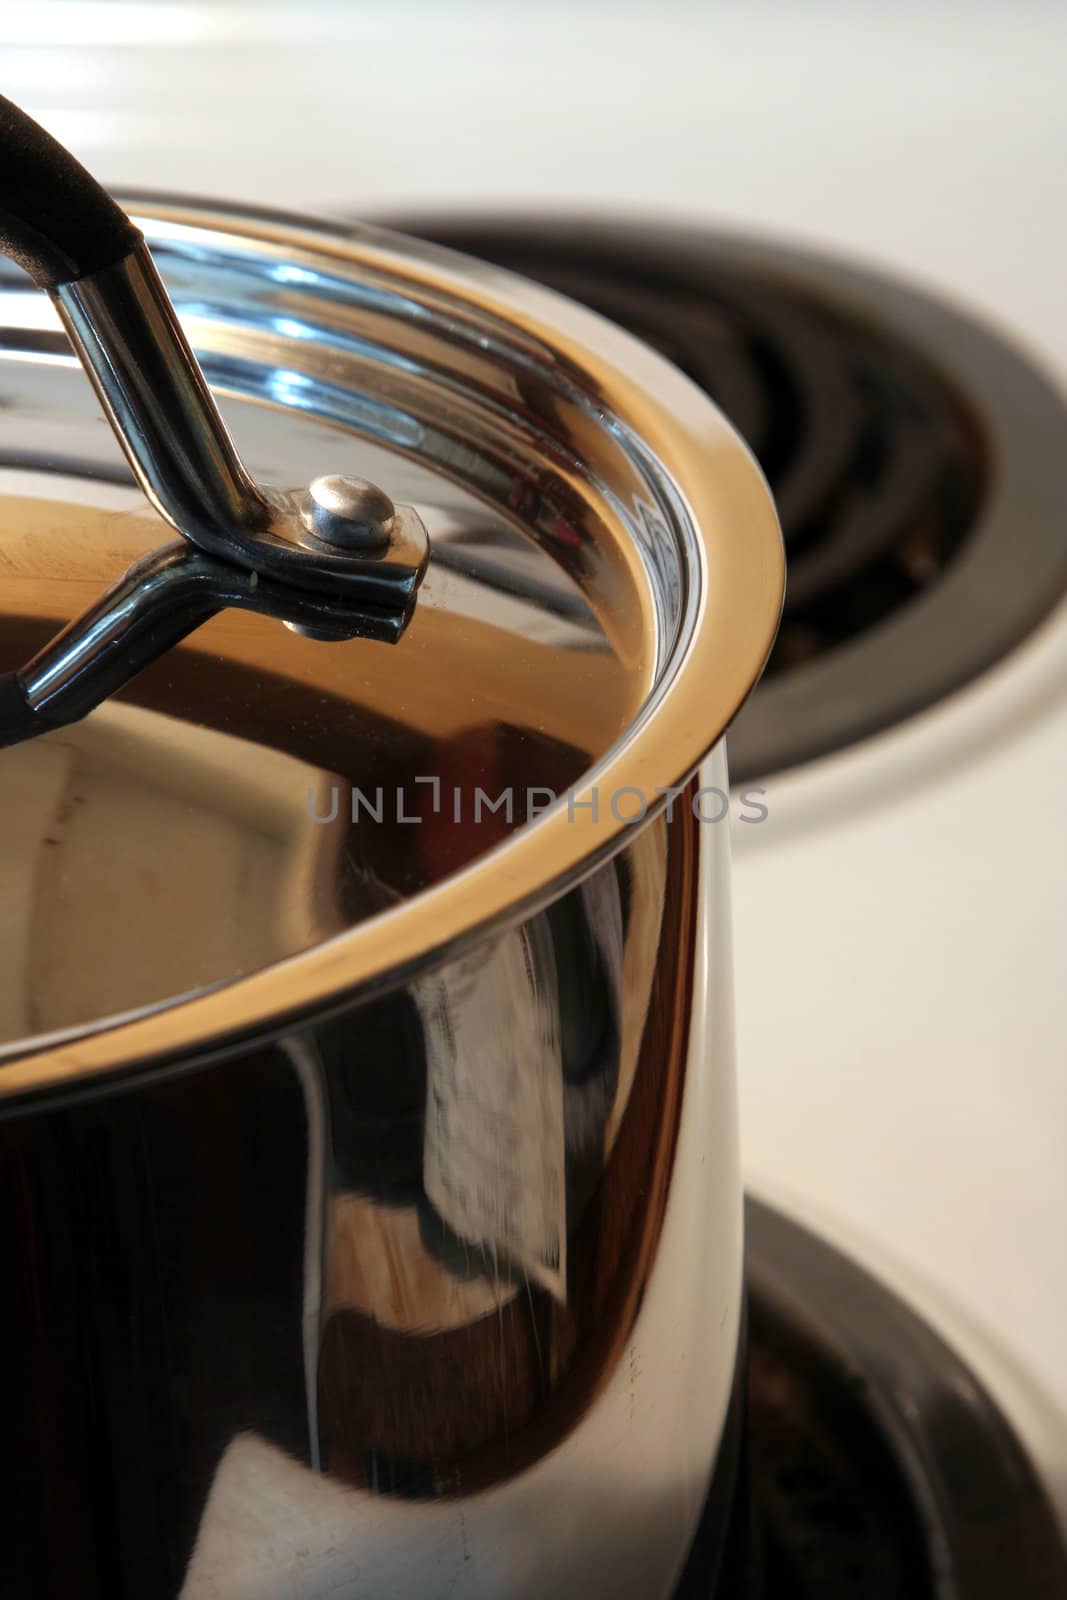 Stainless Steel Pot Lid
 by ca2hill